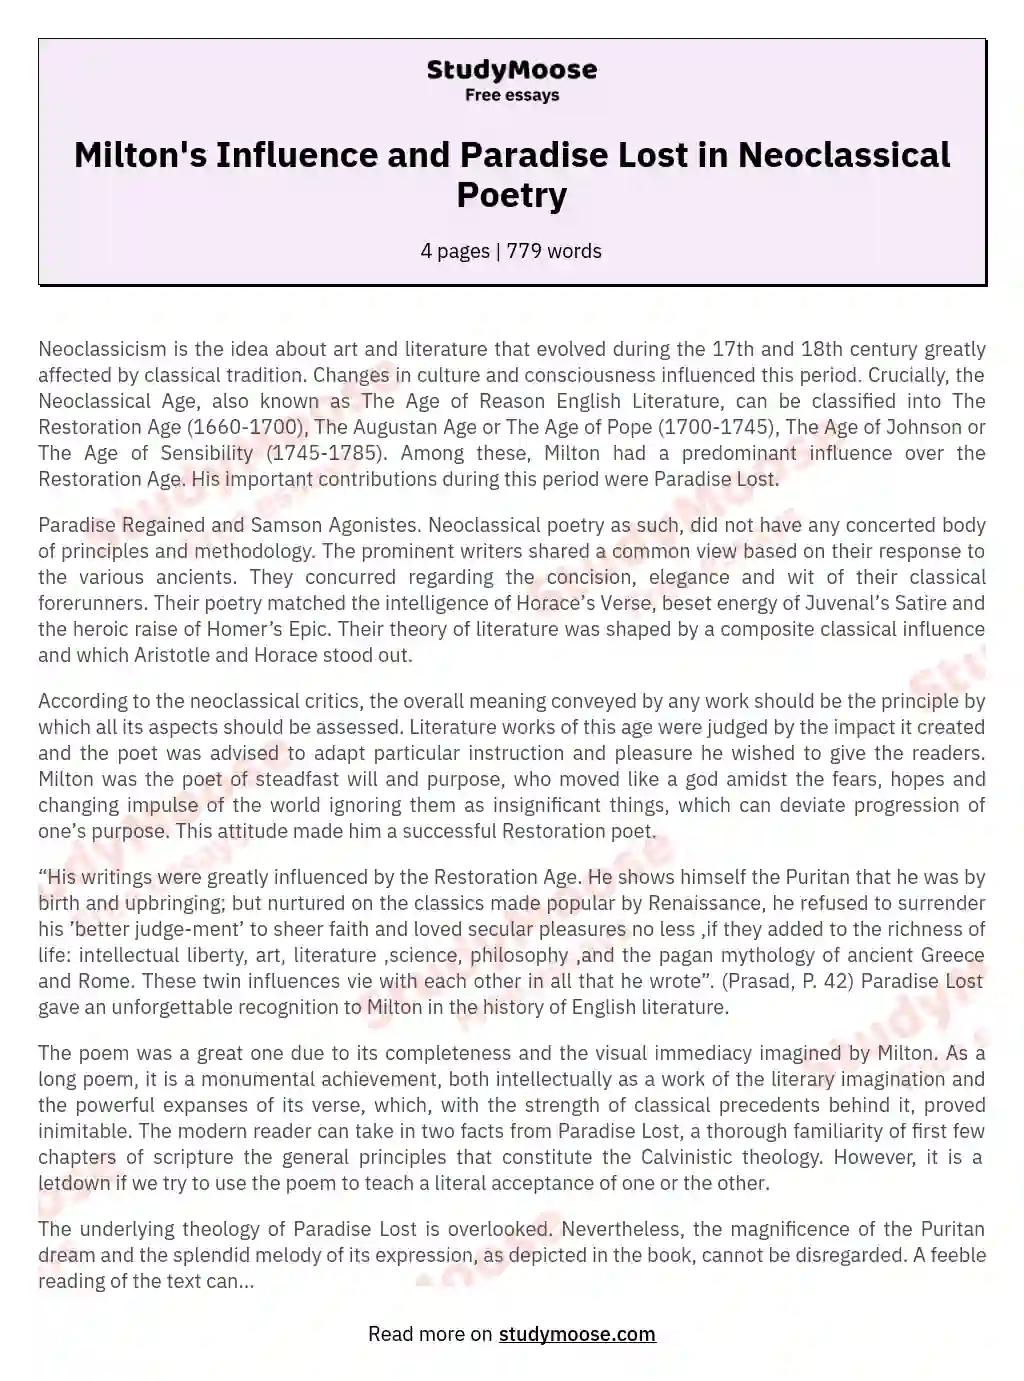 Milton's Influence and Paradise Lost in Neoclassical Poetry essay